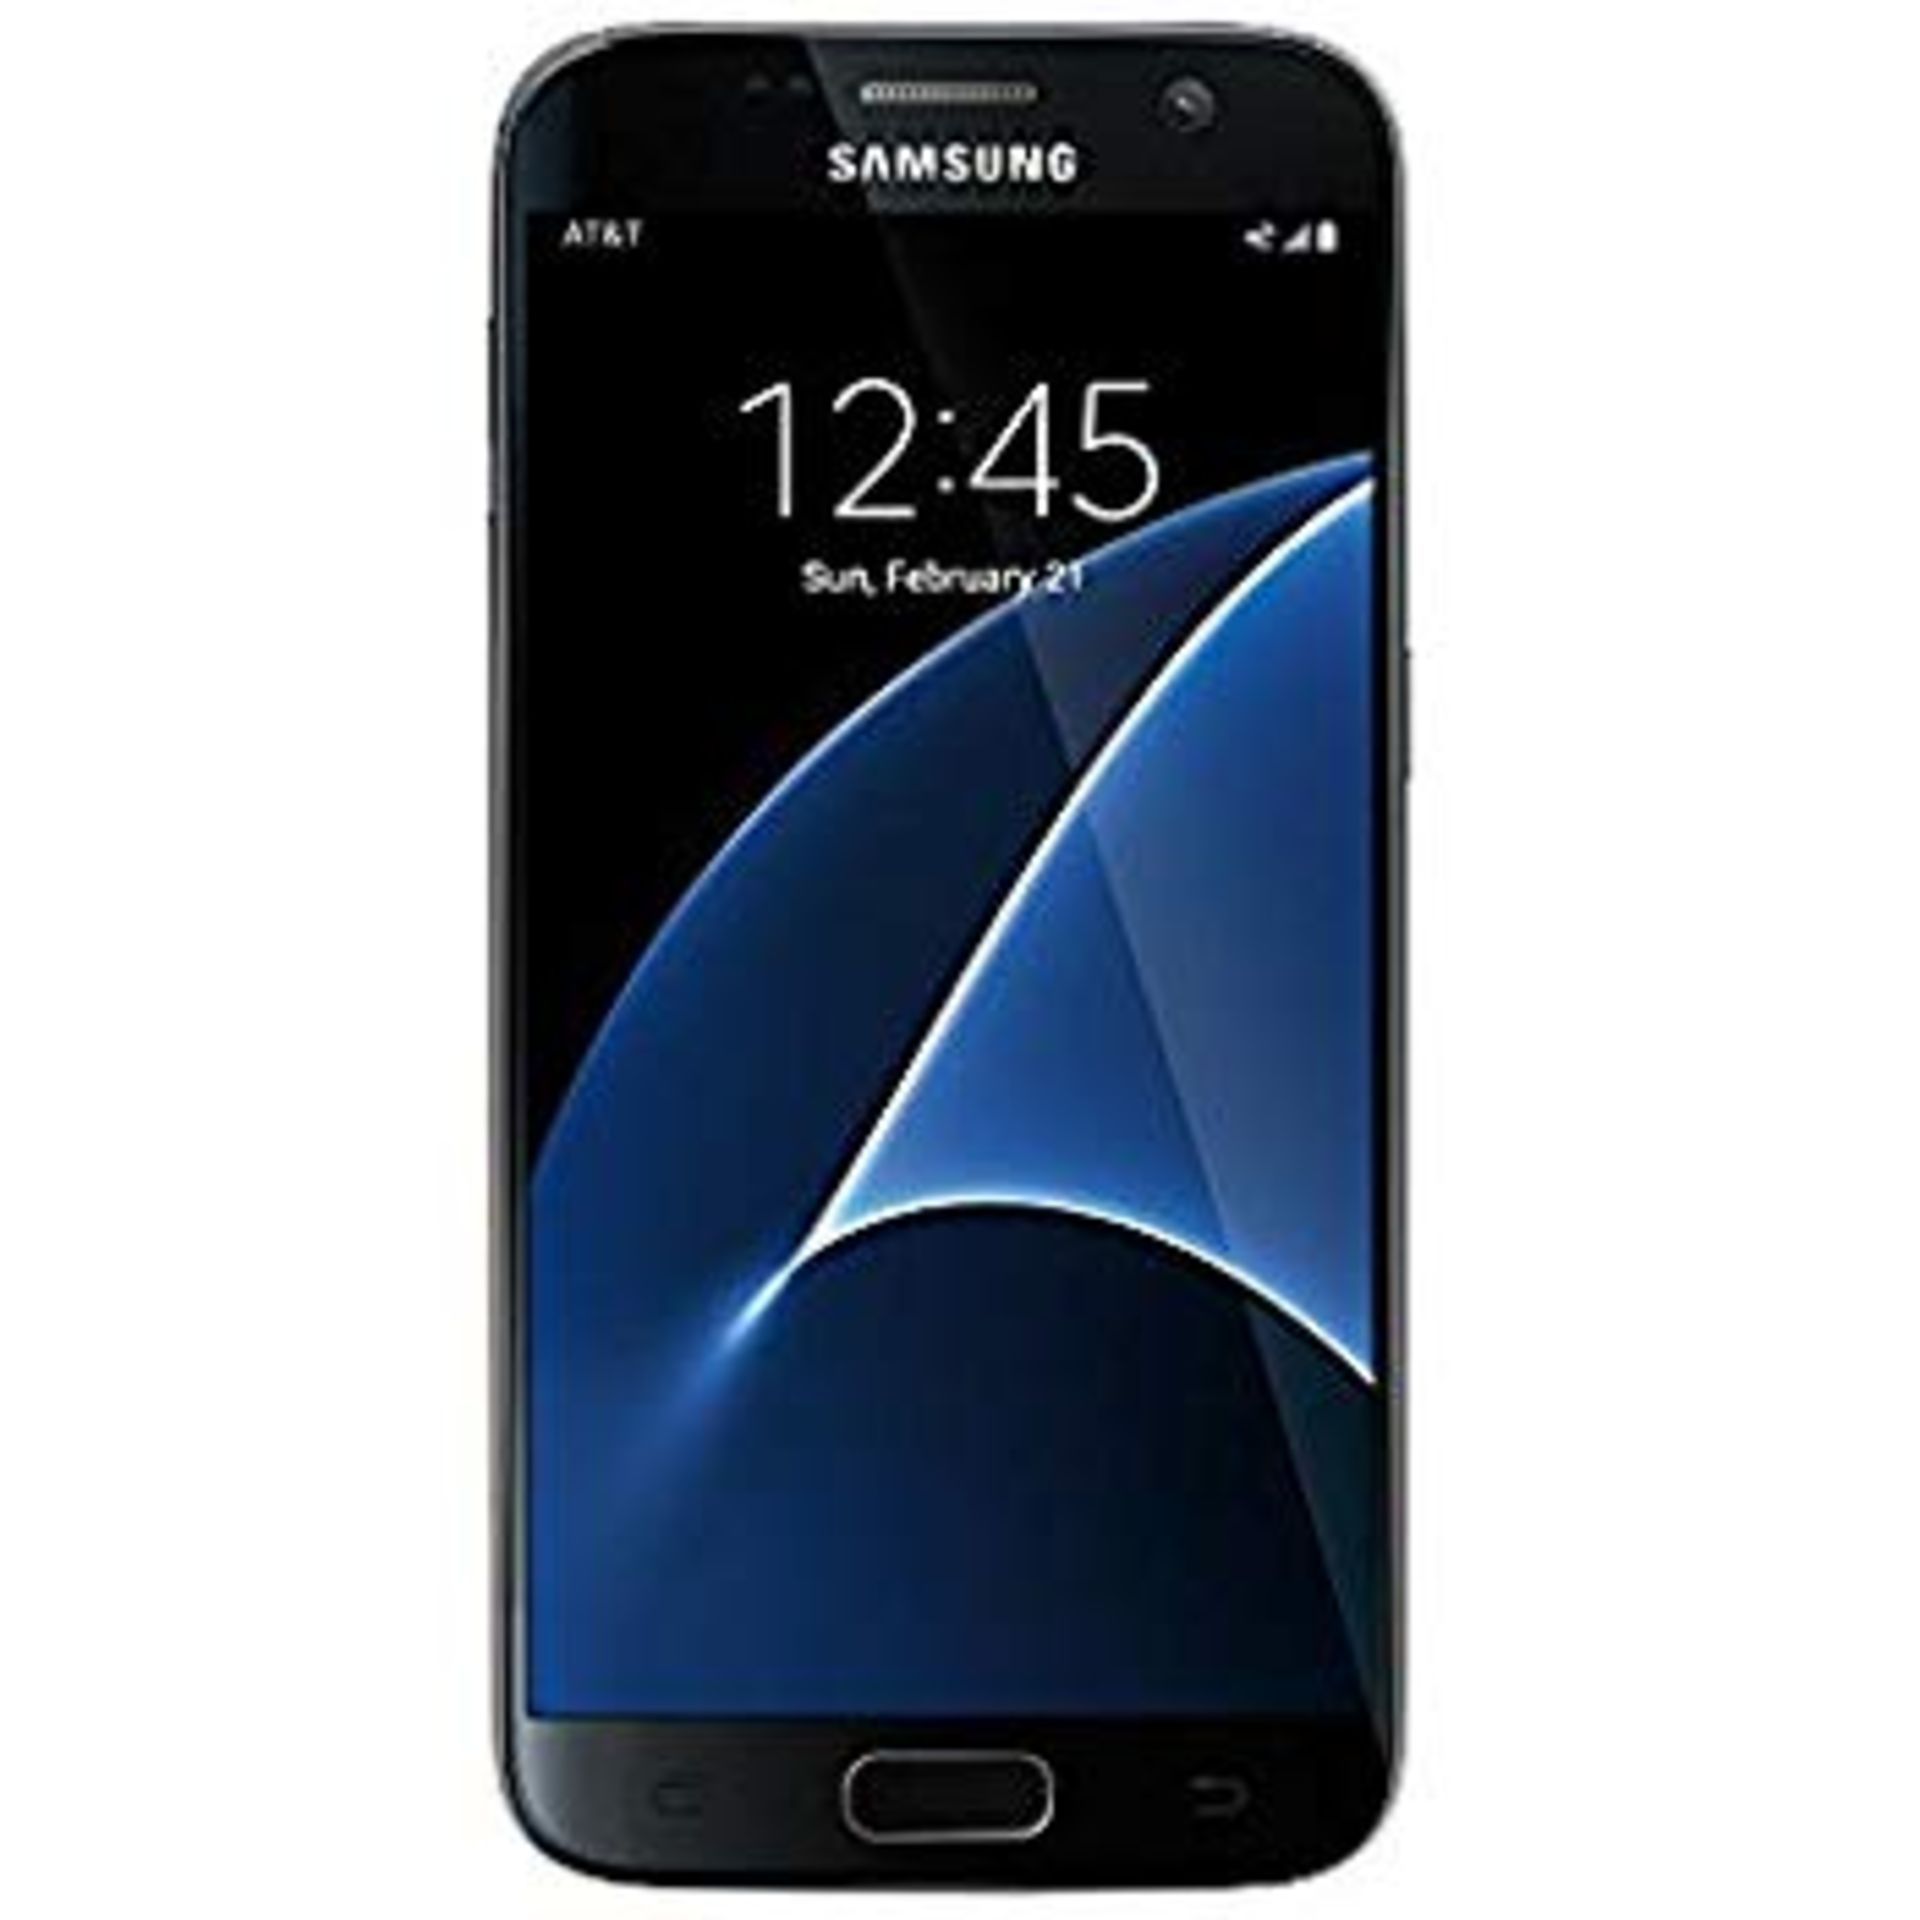 Grade A Samsung S7 ( G930A/T/V/P ) Colours May Vary - Item Available After Approx 15 Working Days